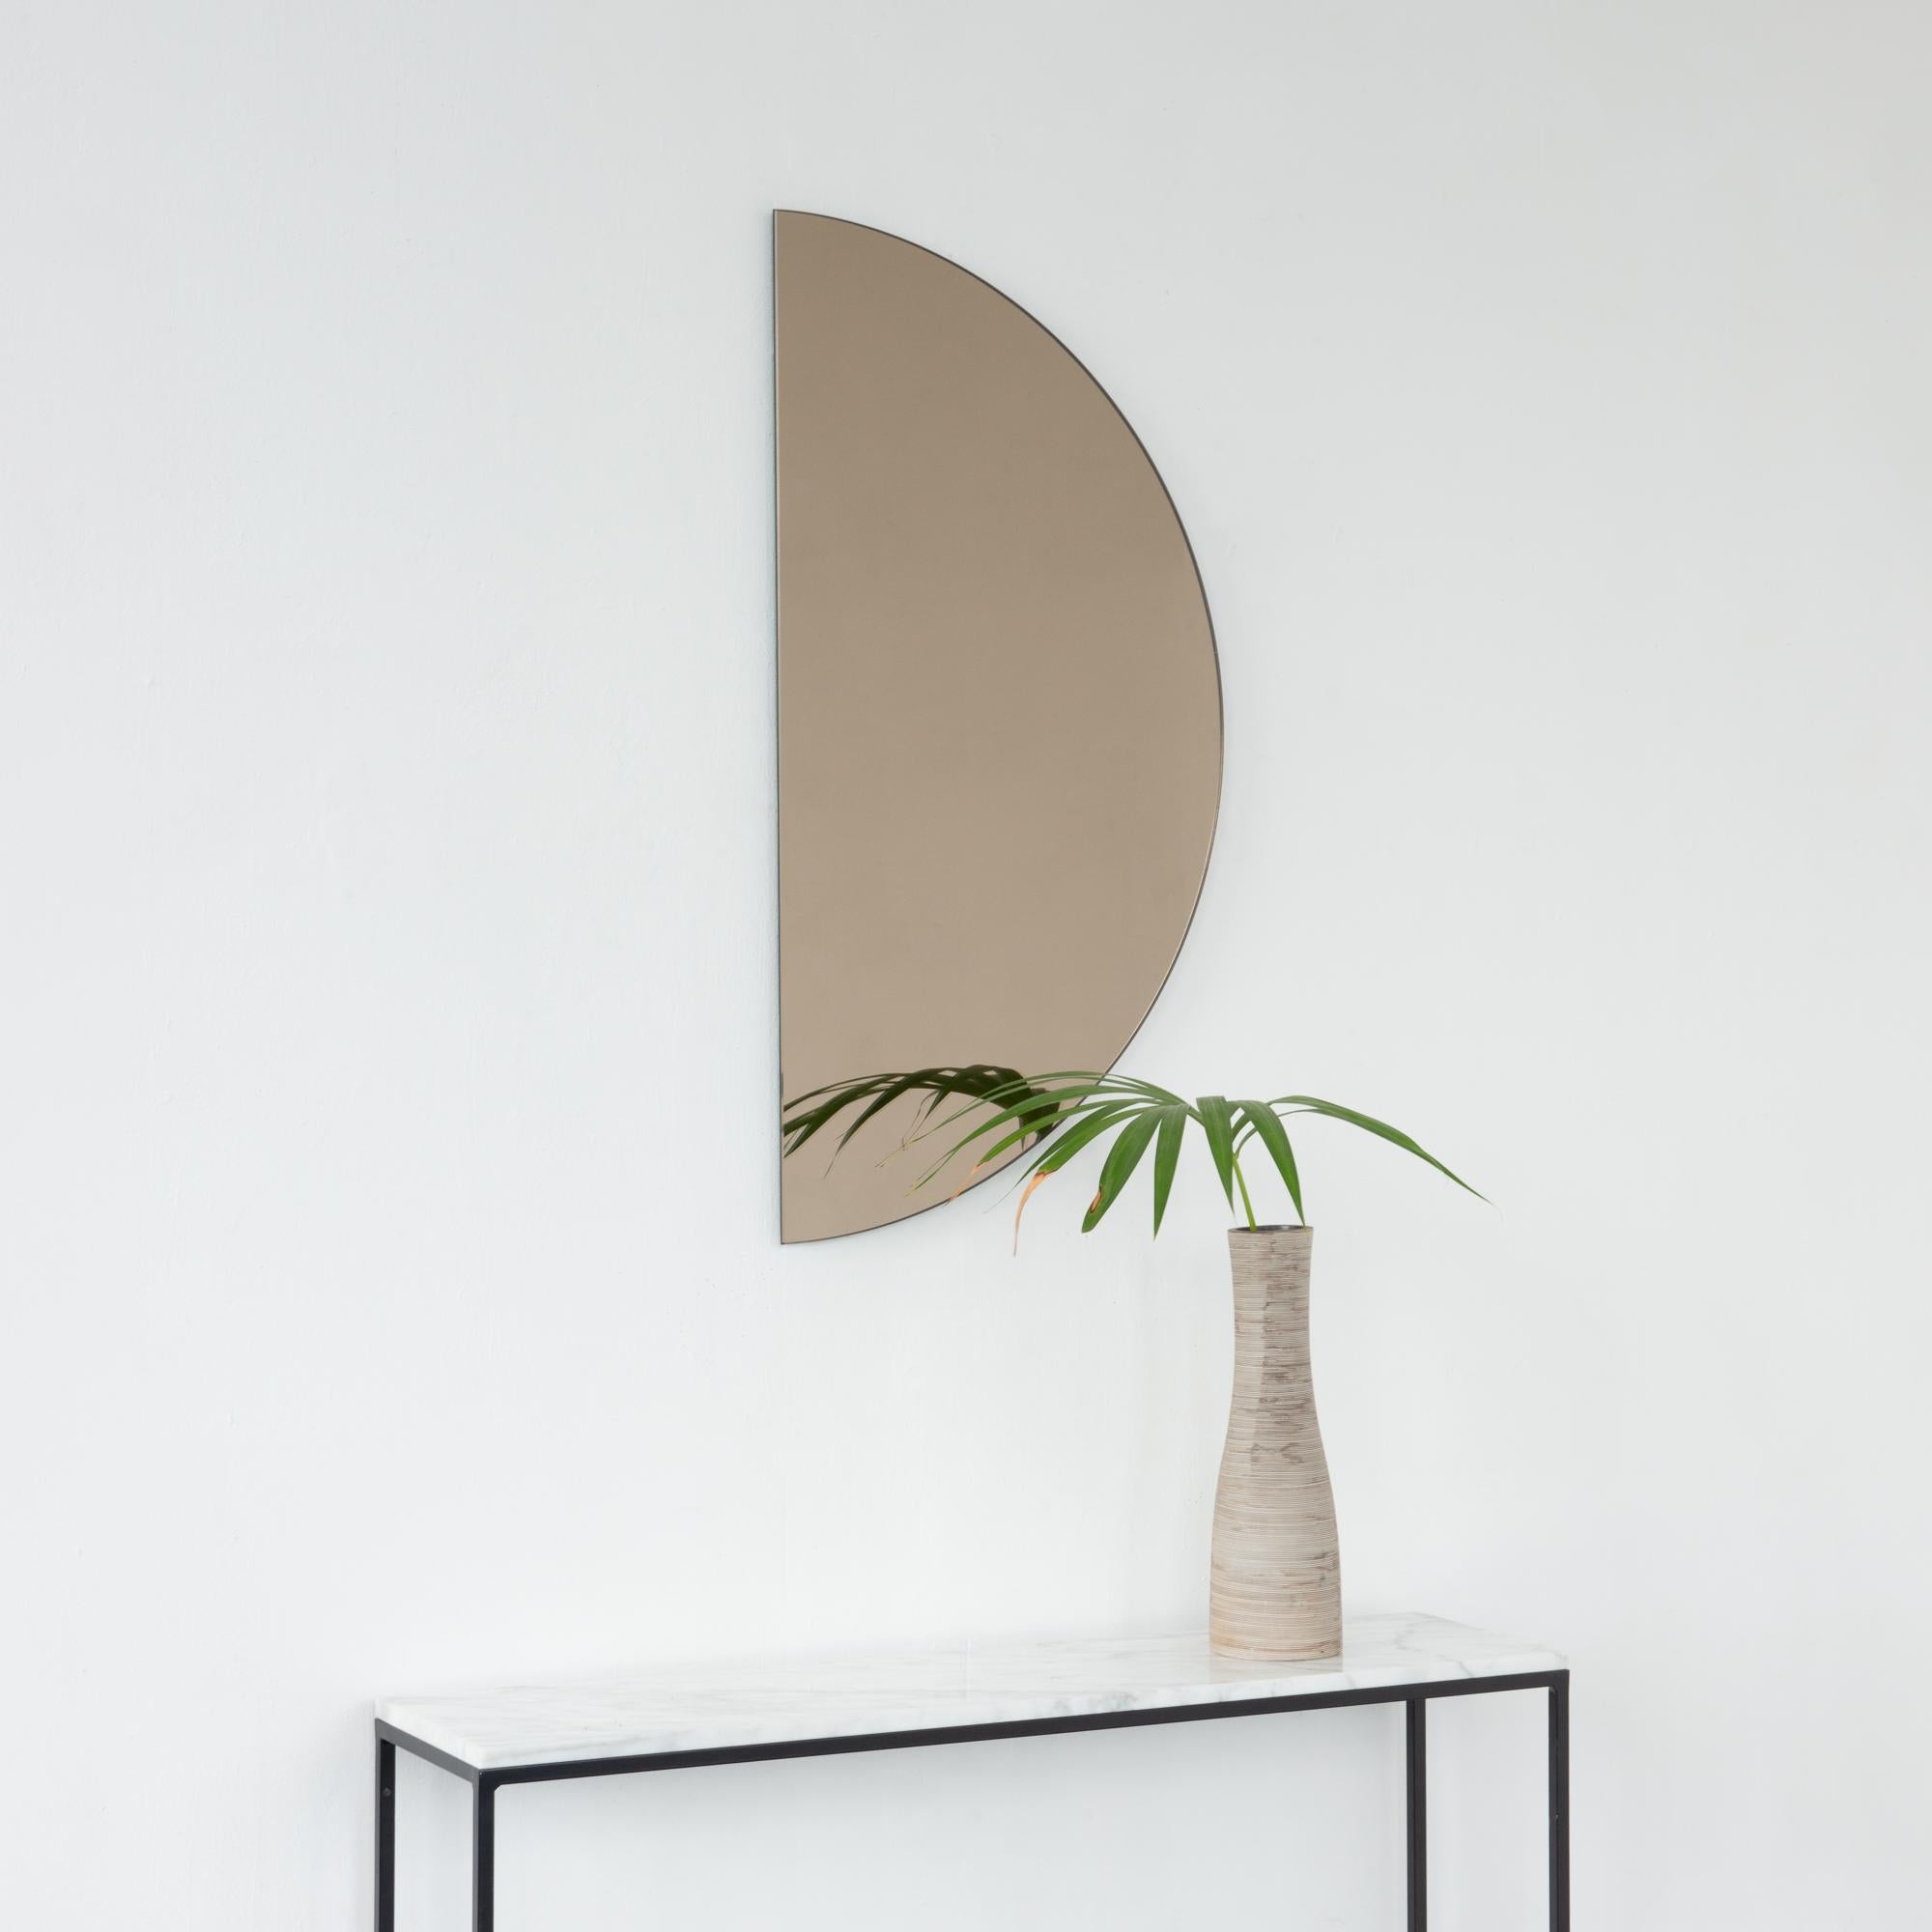  NEW DESIGN

Minimalist half-moon bronze tinted frameless mirror with a floating effect. Fitted with a quality and ingenious hanging system for a flexible installation in 4 different directions. Designed and made in London, UK. 

The backing has a